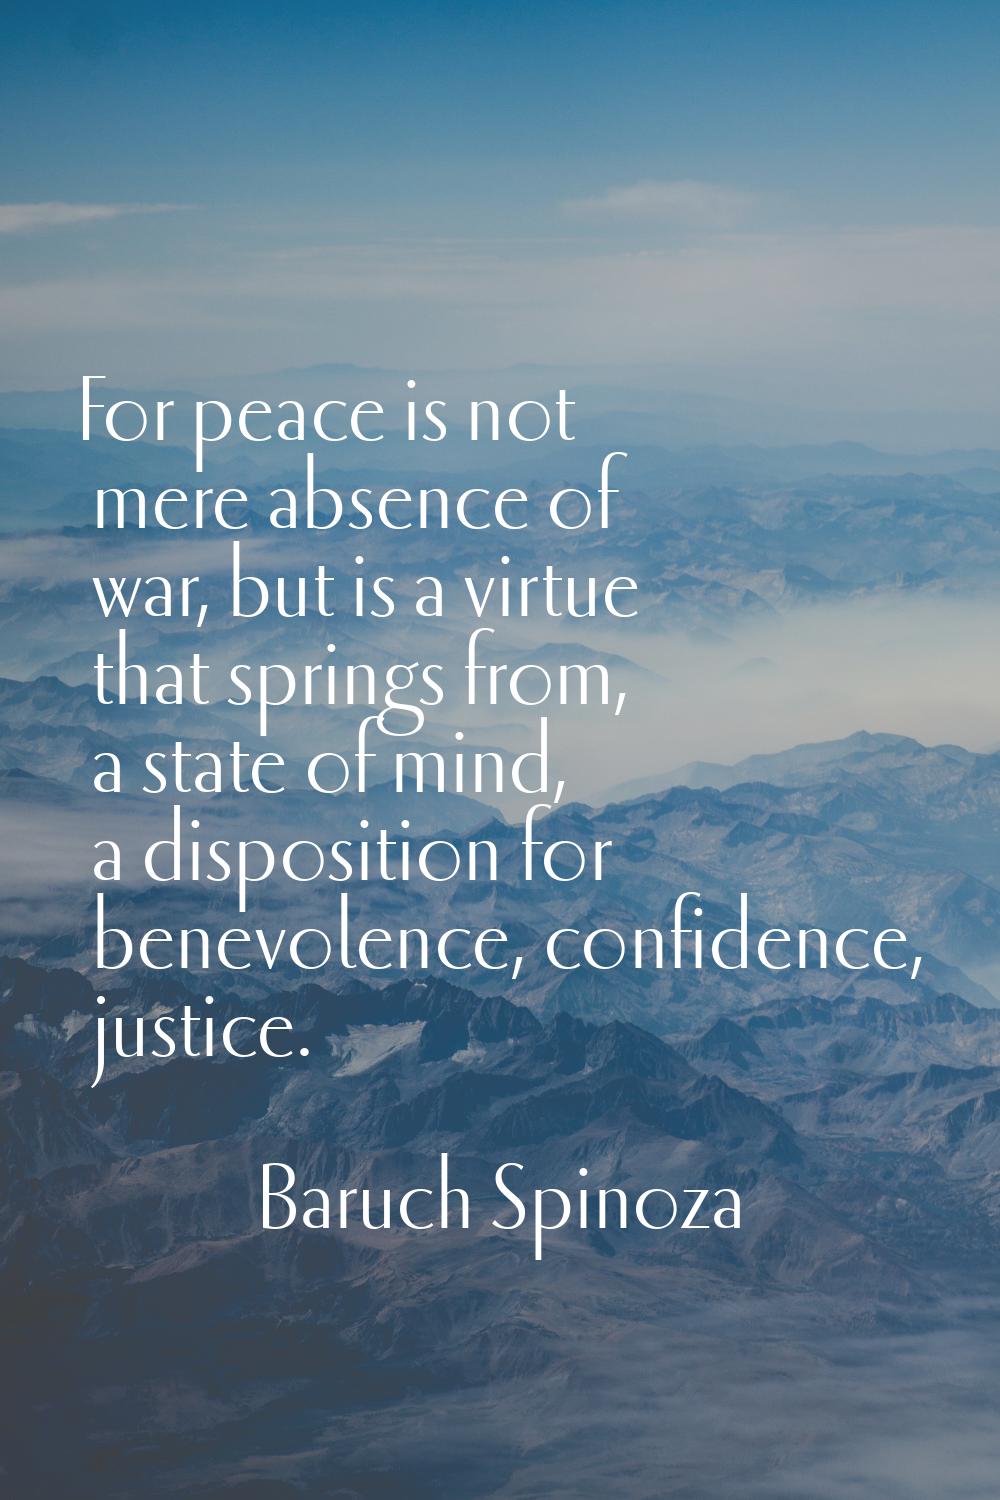 For peace is not mere absence of war, but is a virtue that springs from, a state of mind, a disposi